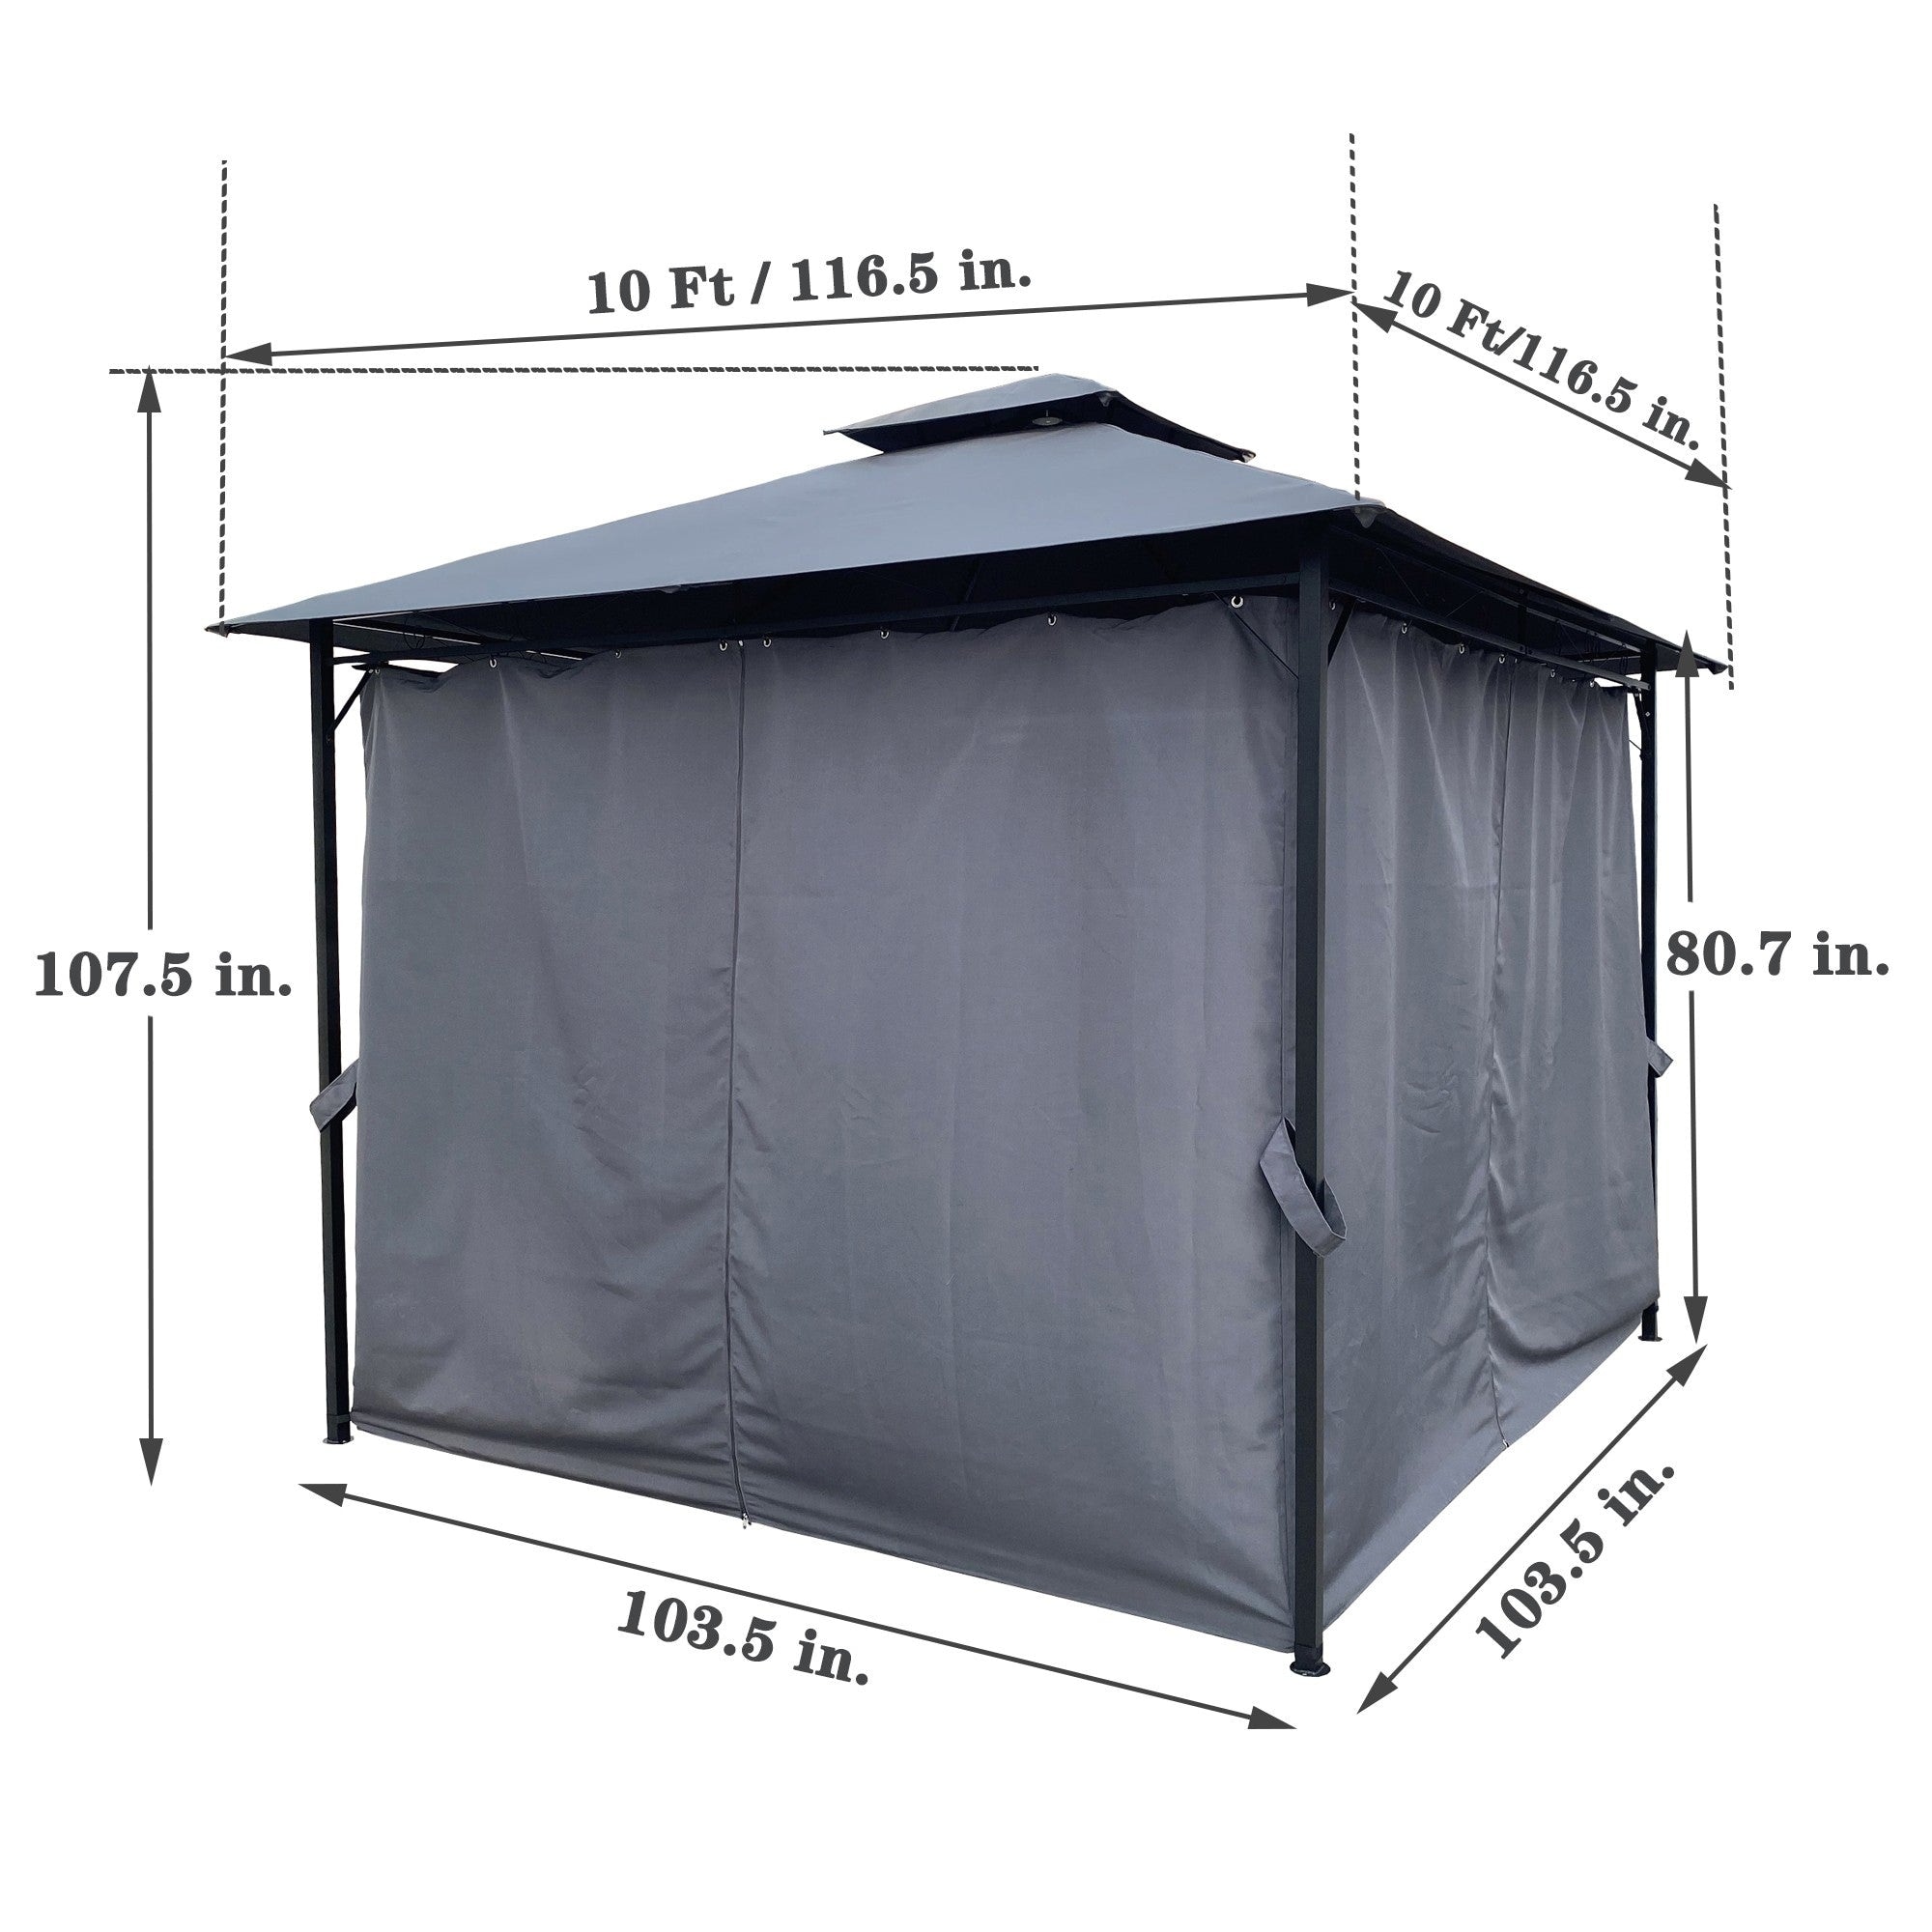 10' X 10' Steel Polyester Soft-Top Outdoor Canopy Gazebo Patio Tent